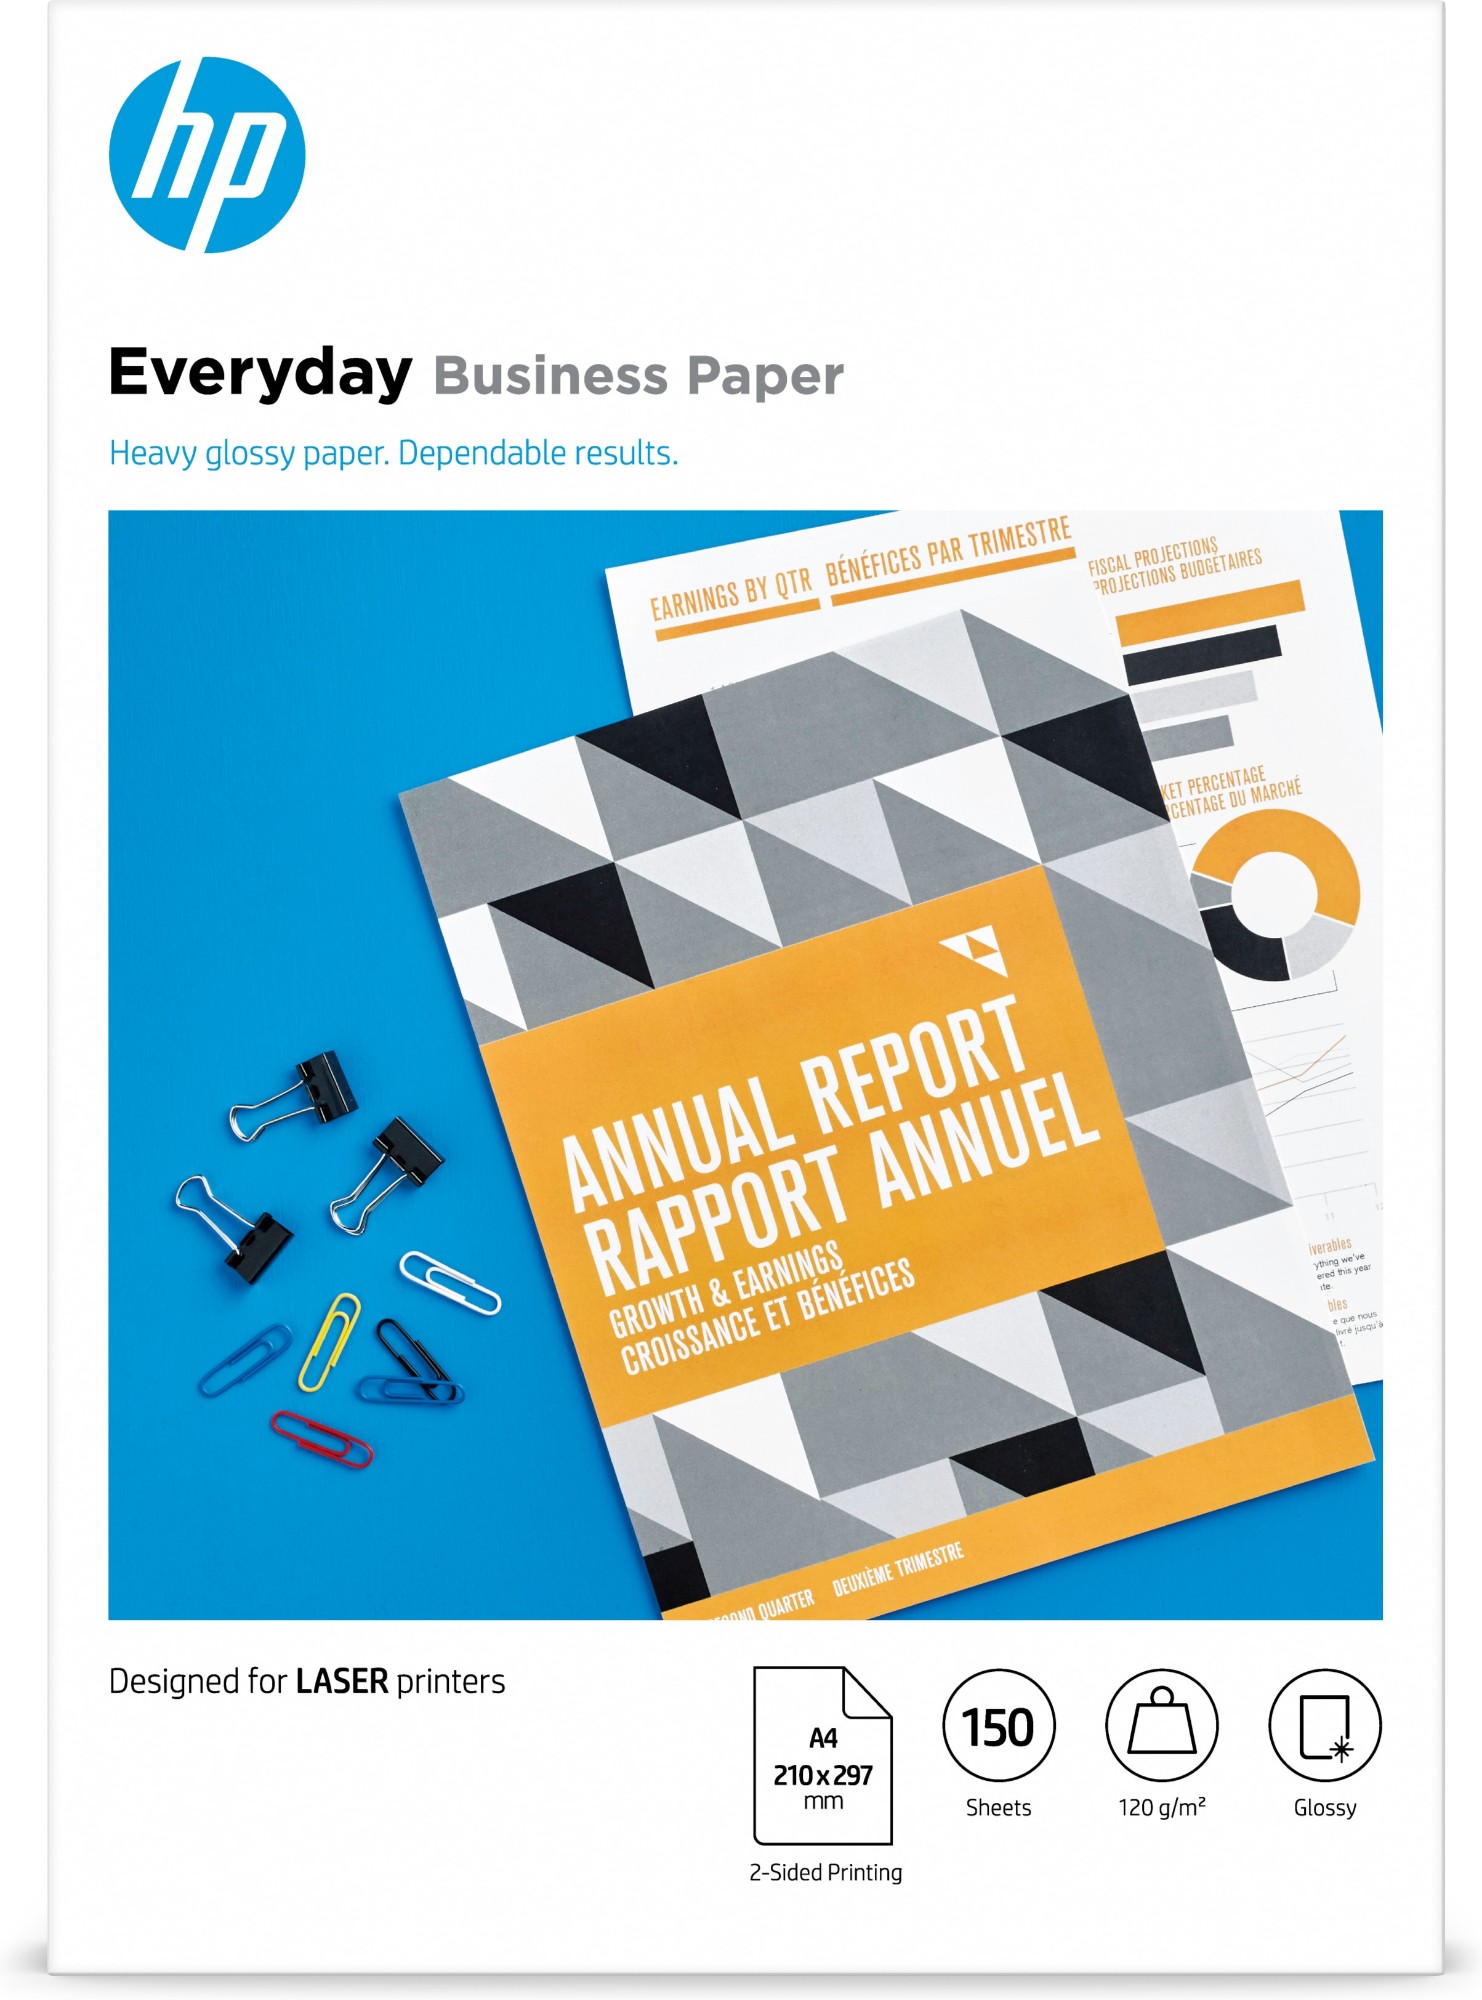 HP Laser Everyday Business Paper A4, glossy, 120gsm